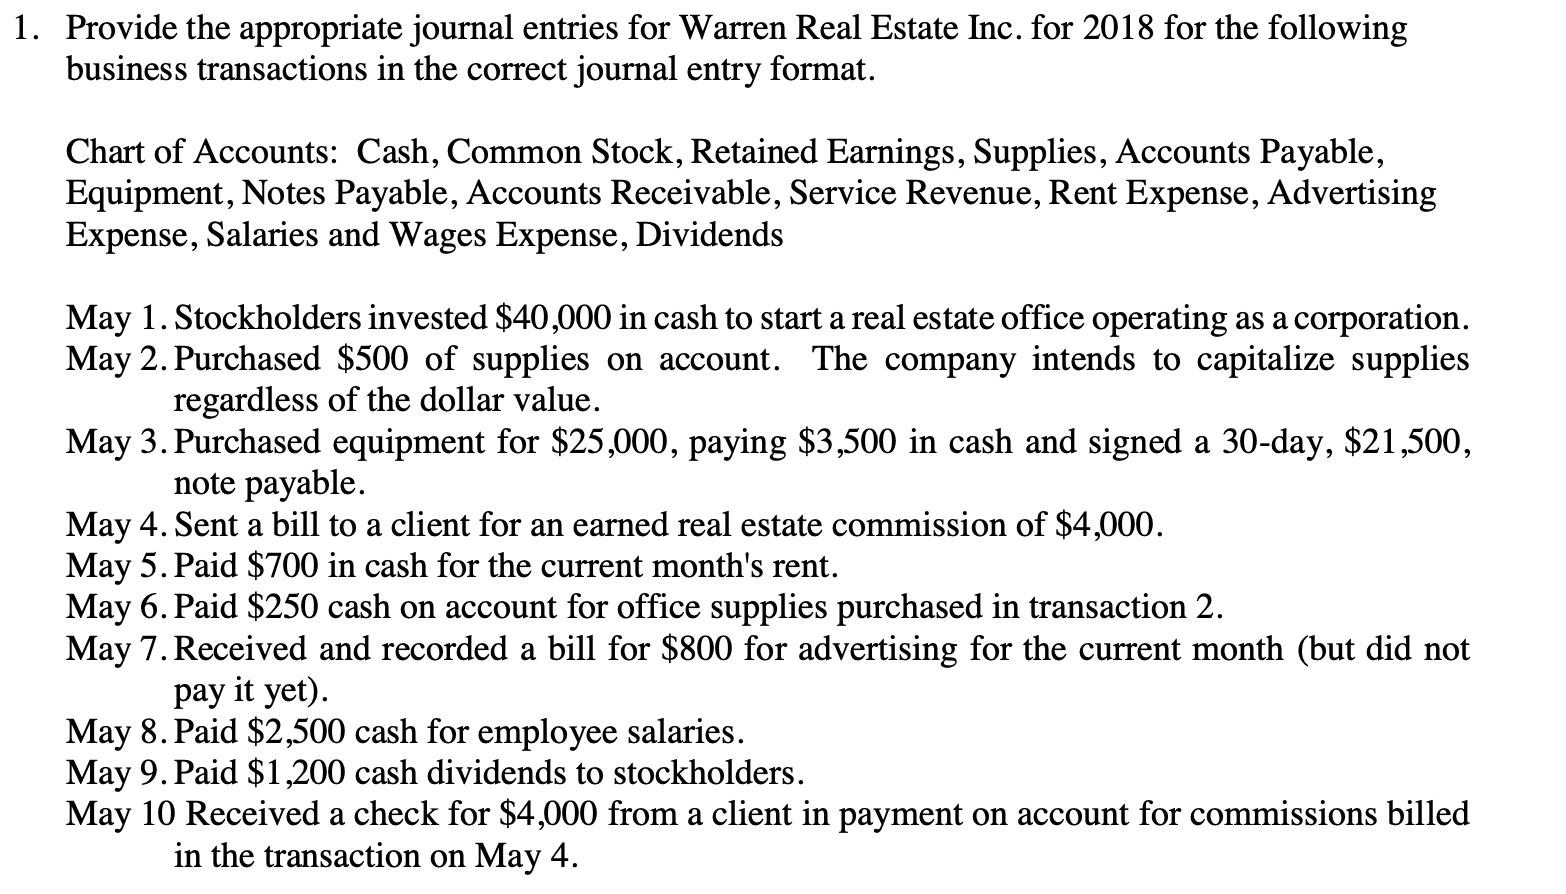 1. Provide the appropriate journal entries for Warren Real Estate Inc. for 2018 for the following business